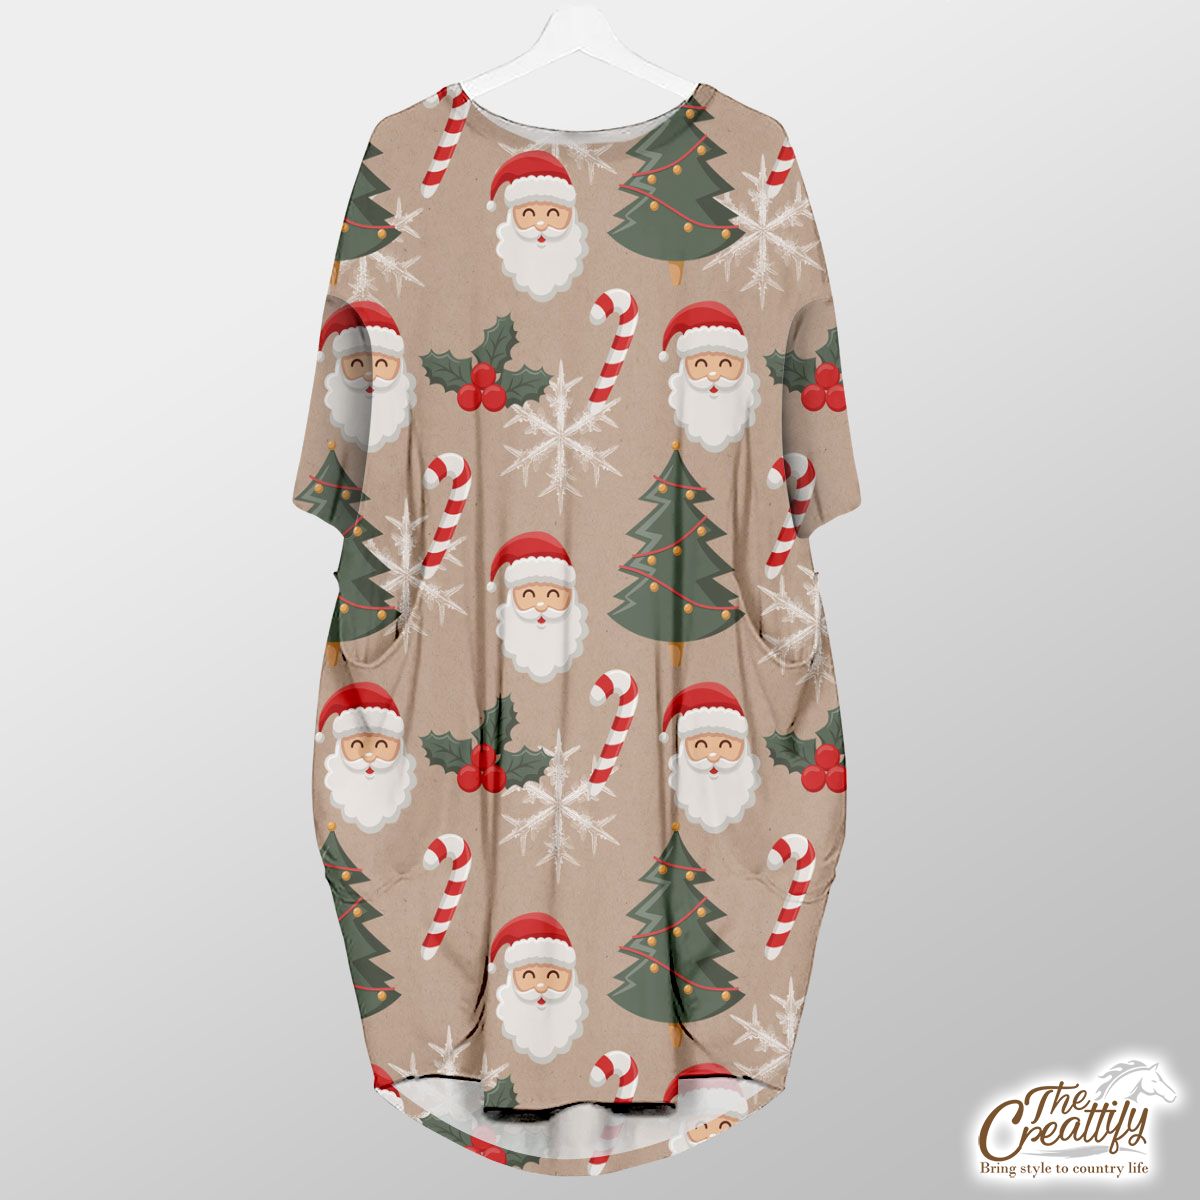 Santa Clause, Christmas Tree, Candy Cane, Holly Leaf On Snowflake Background Pocket Dress